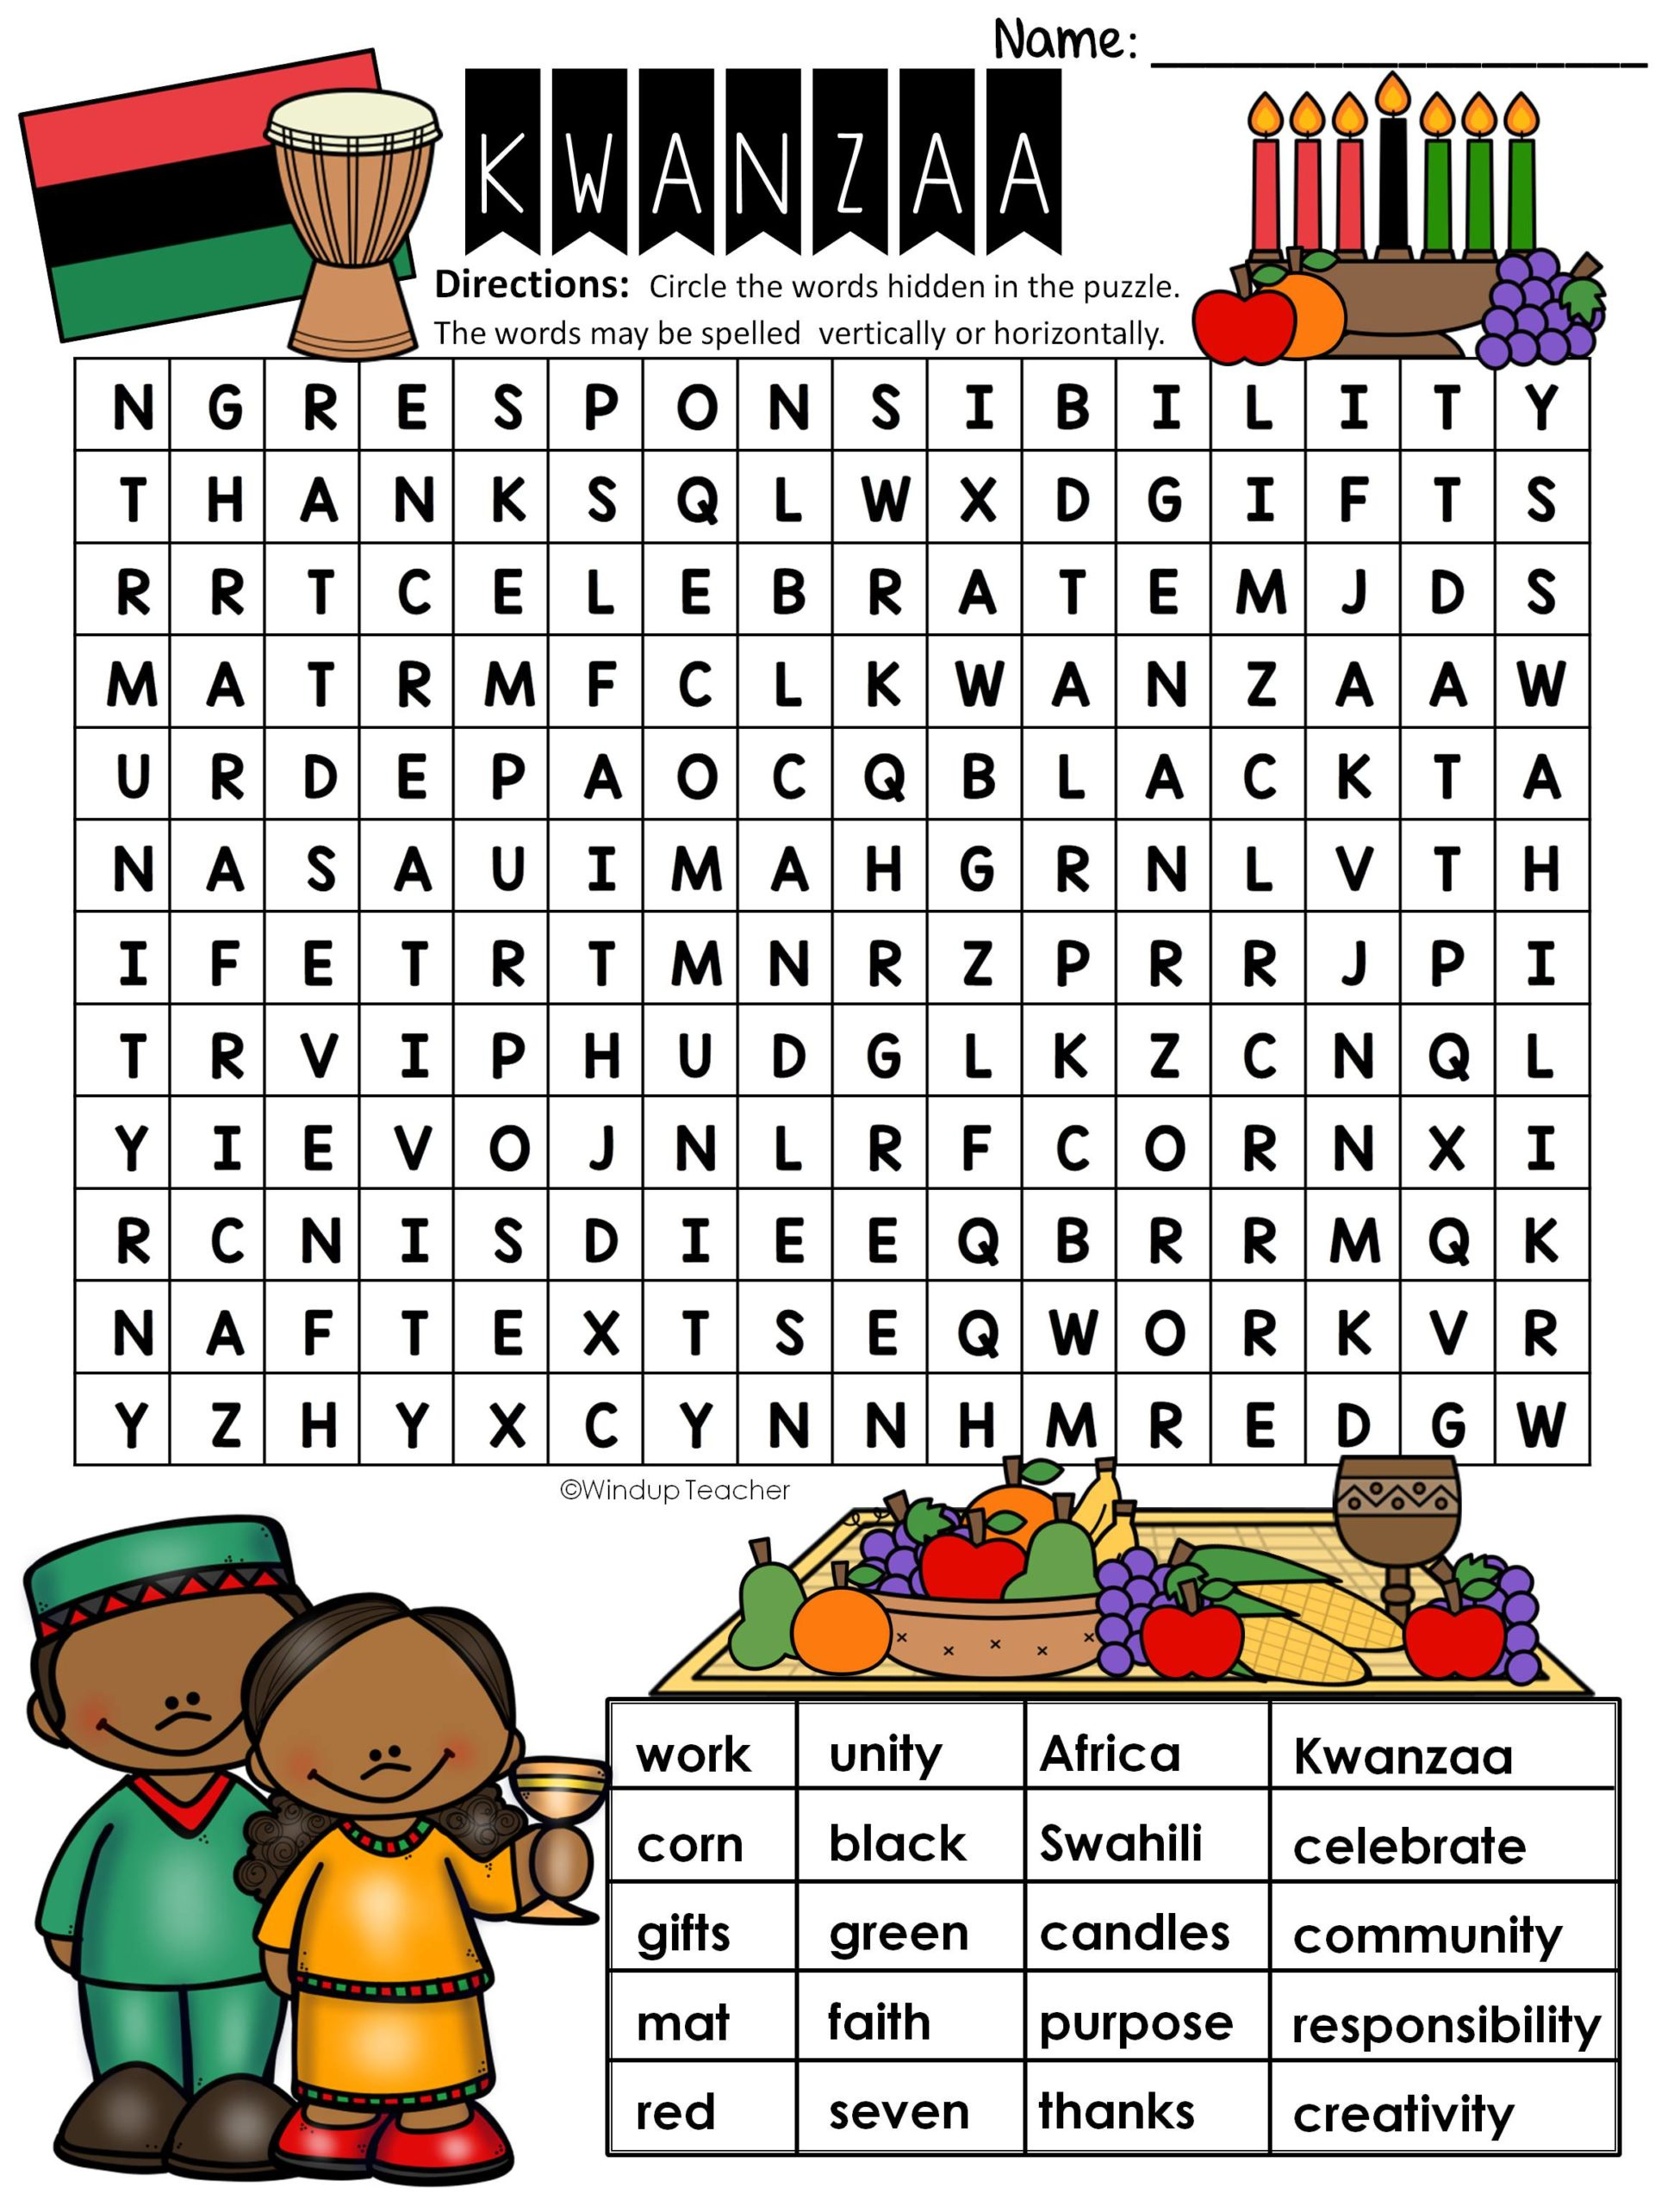 Kwanzaa Word Search EASY Puzzle Ready To Go Made By Teachers